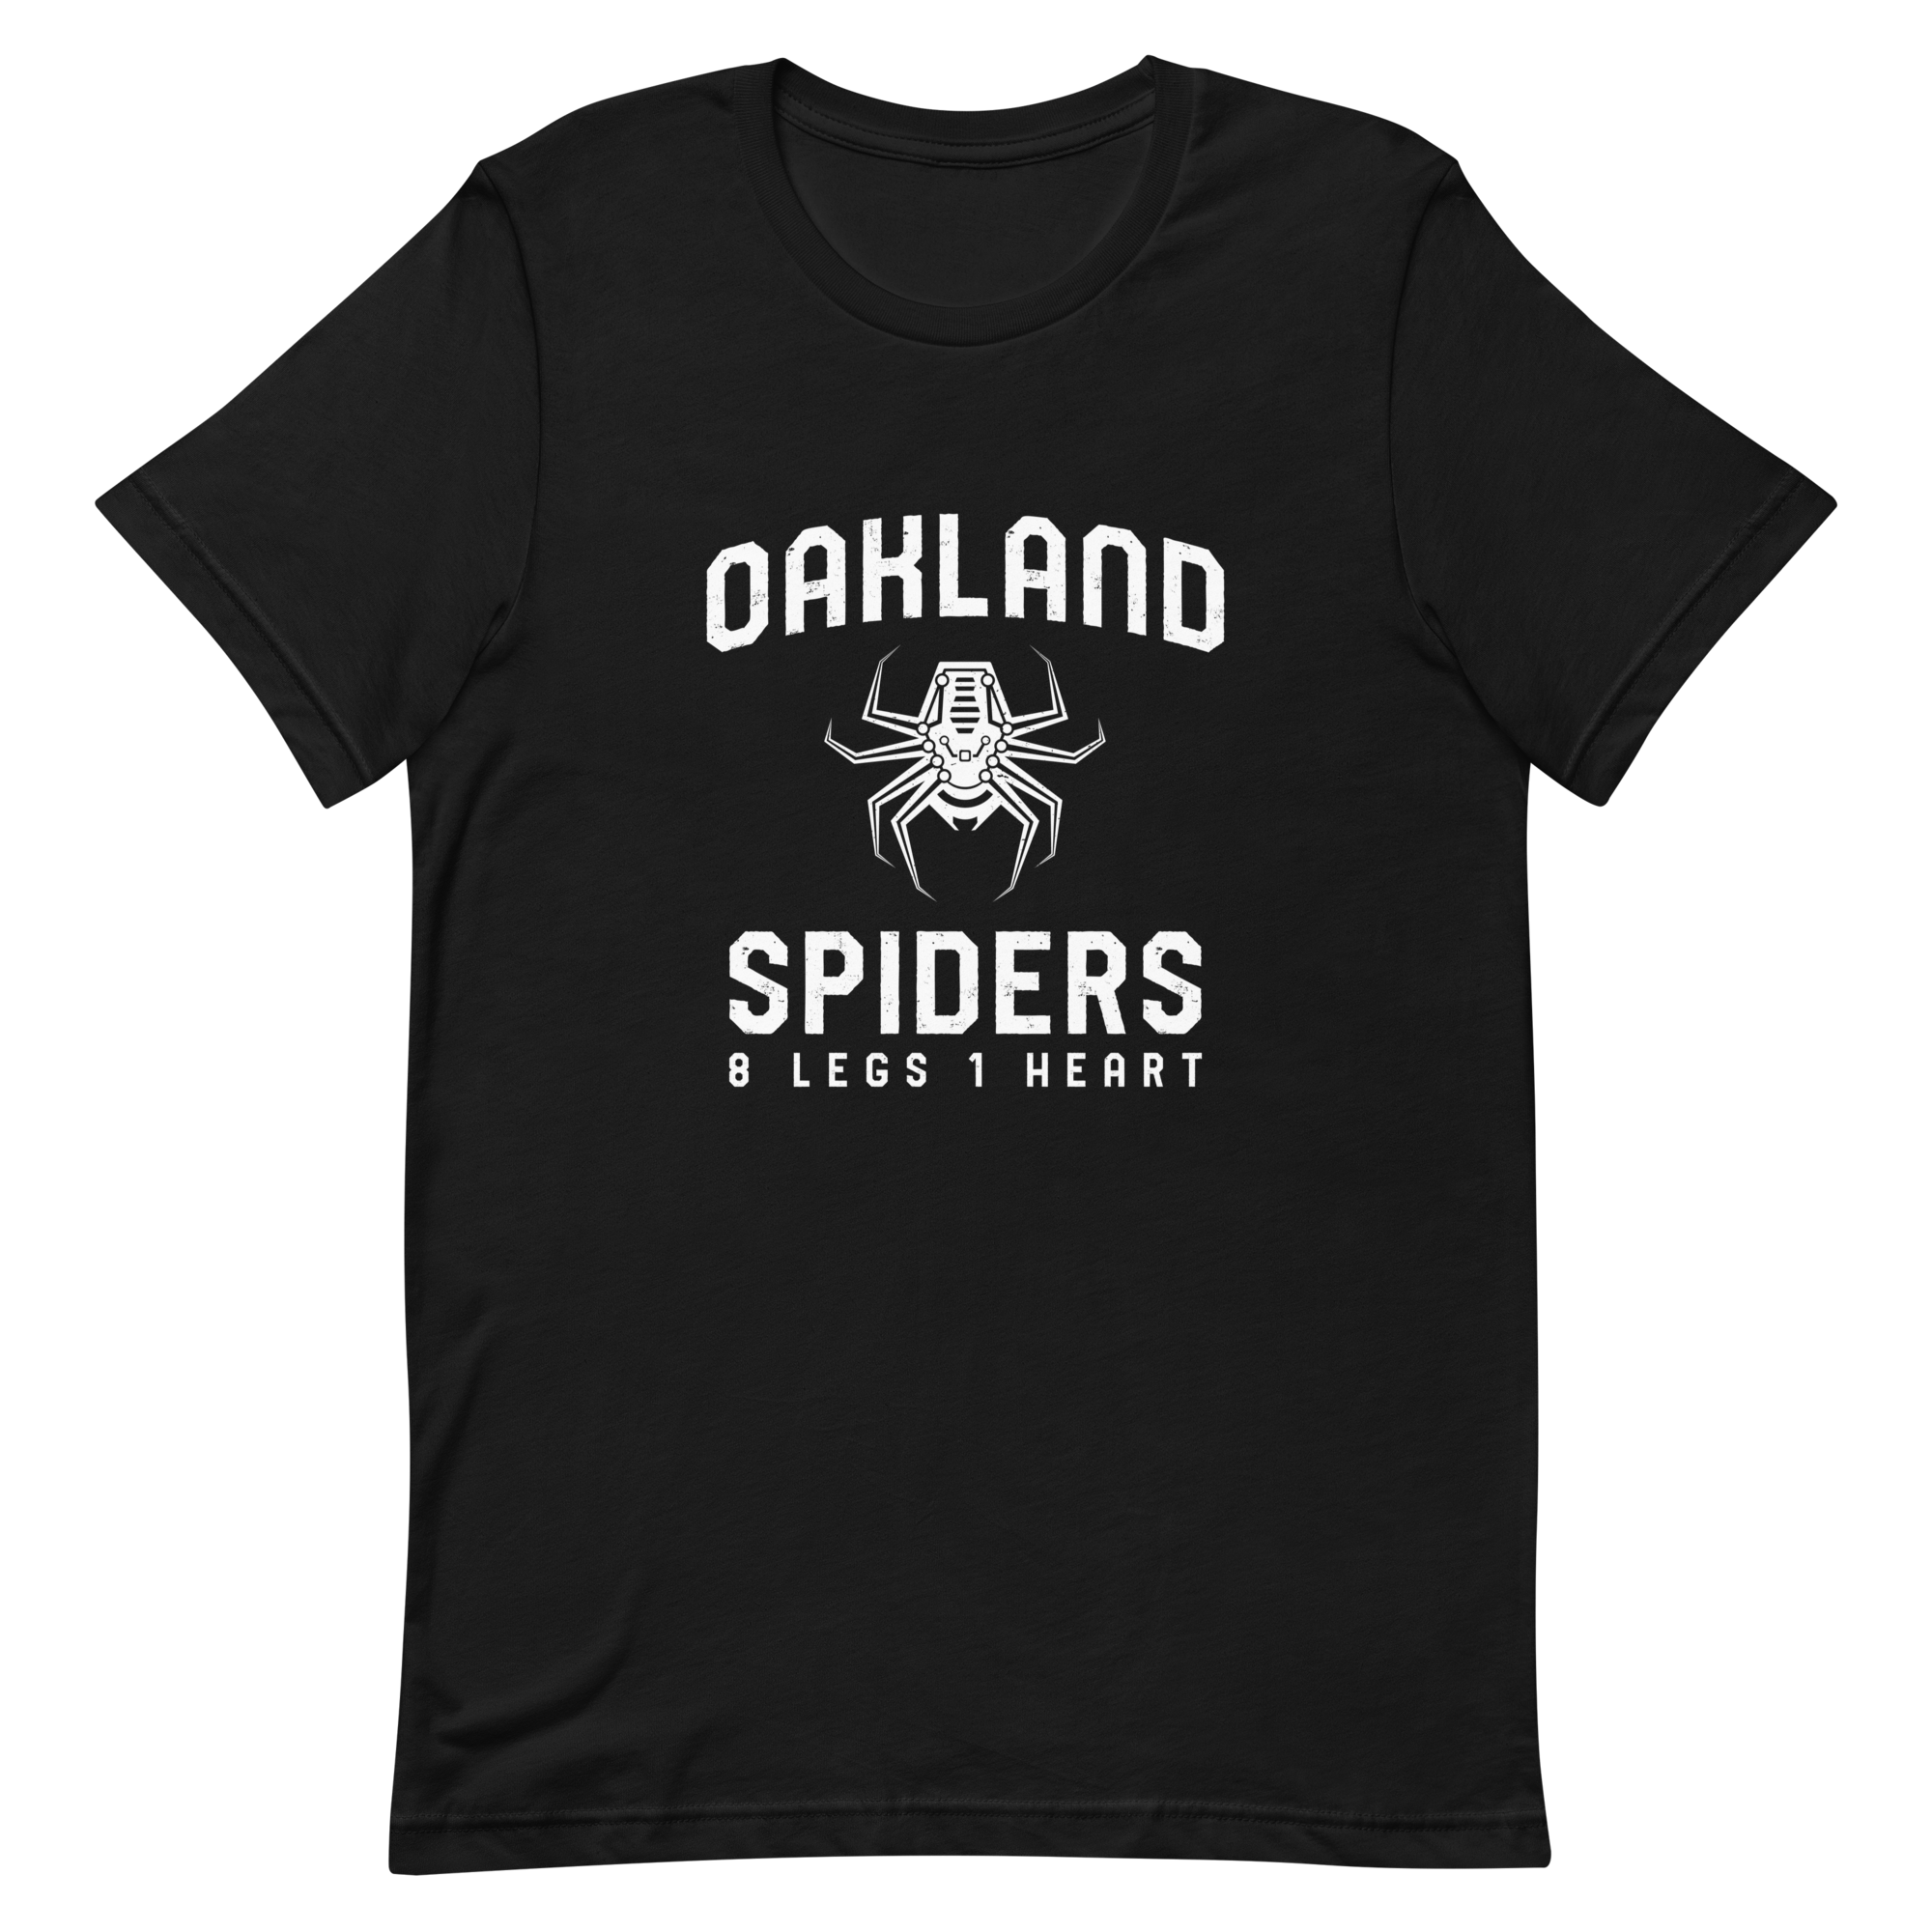 Oakland Spiders Tee- White Print